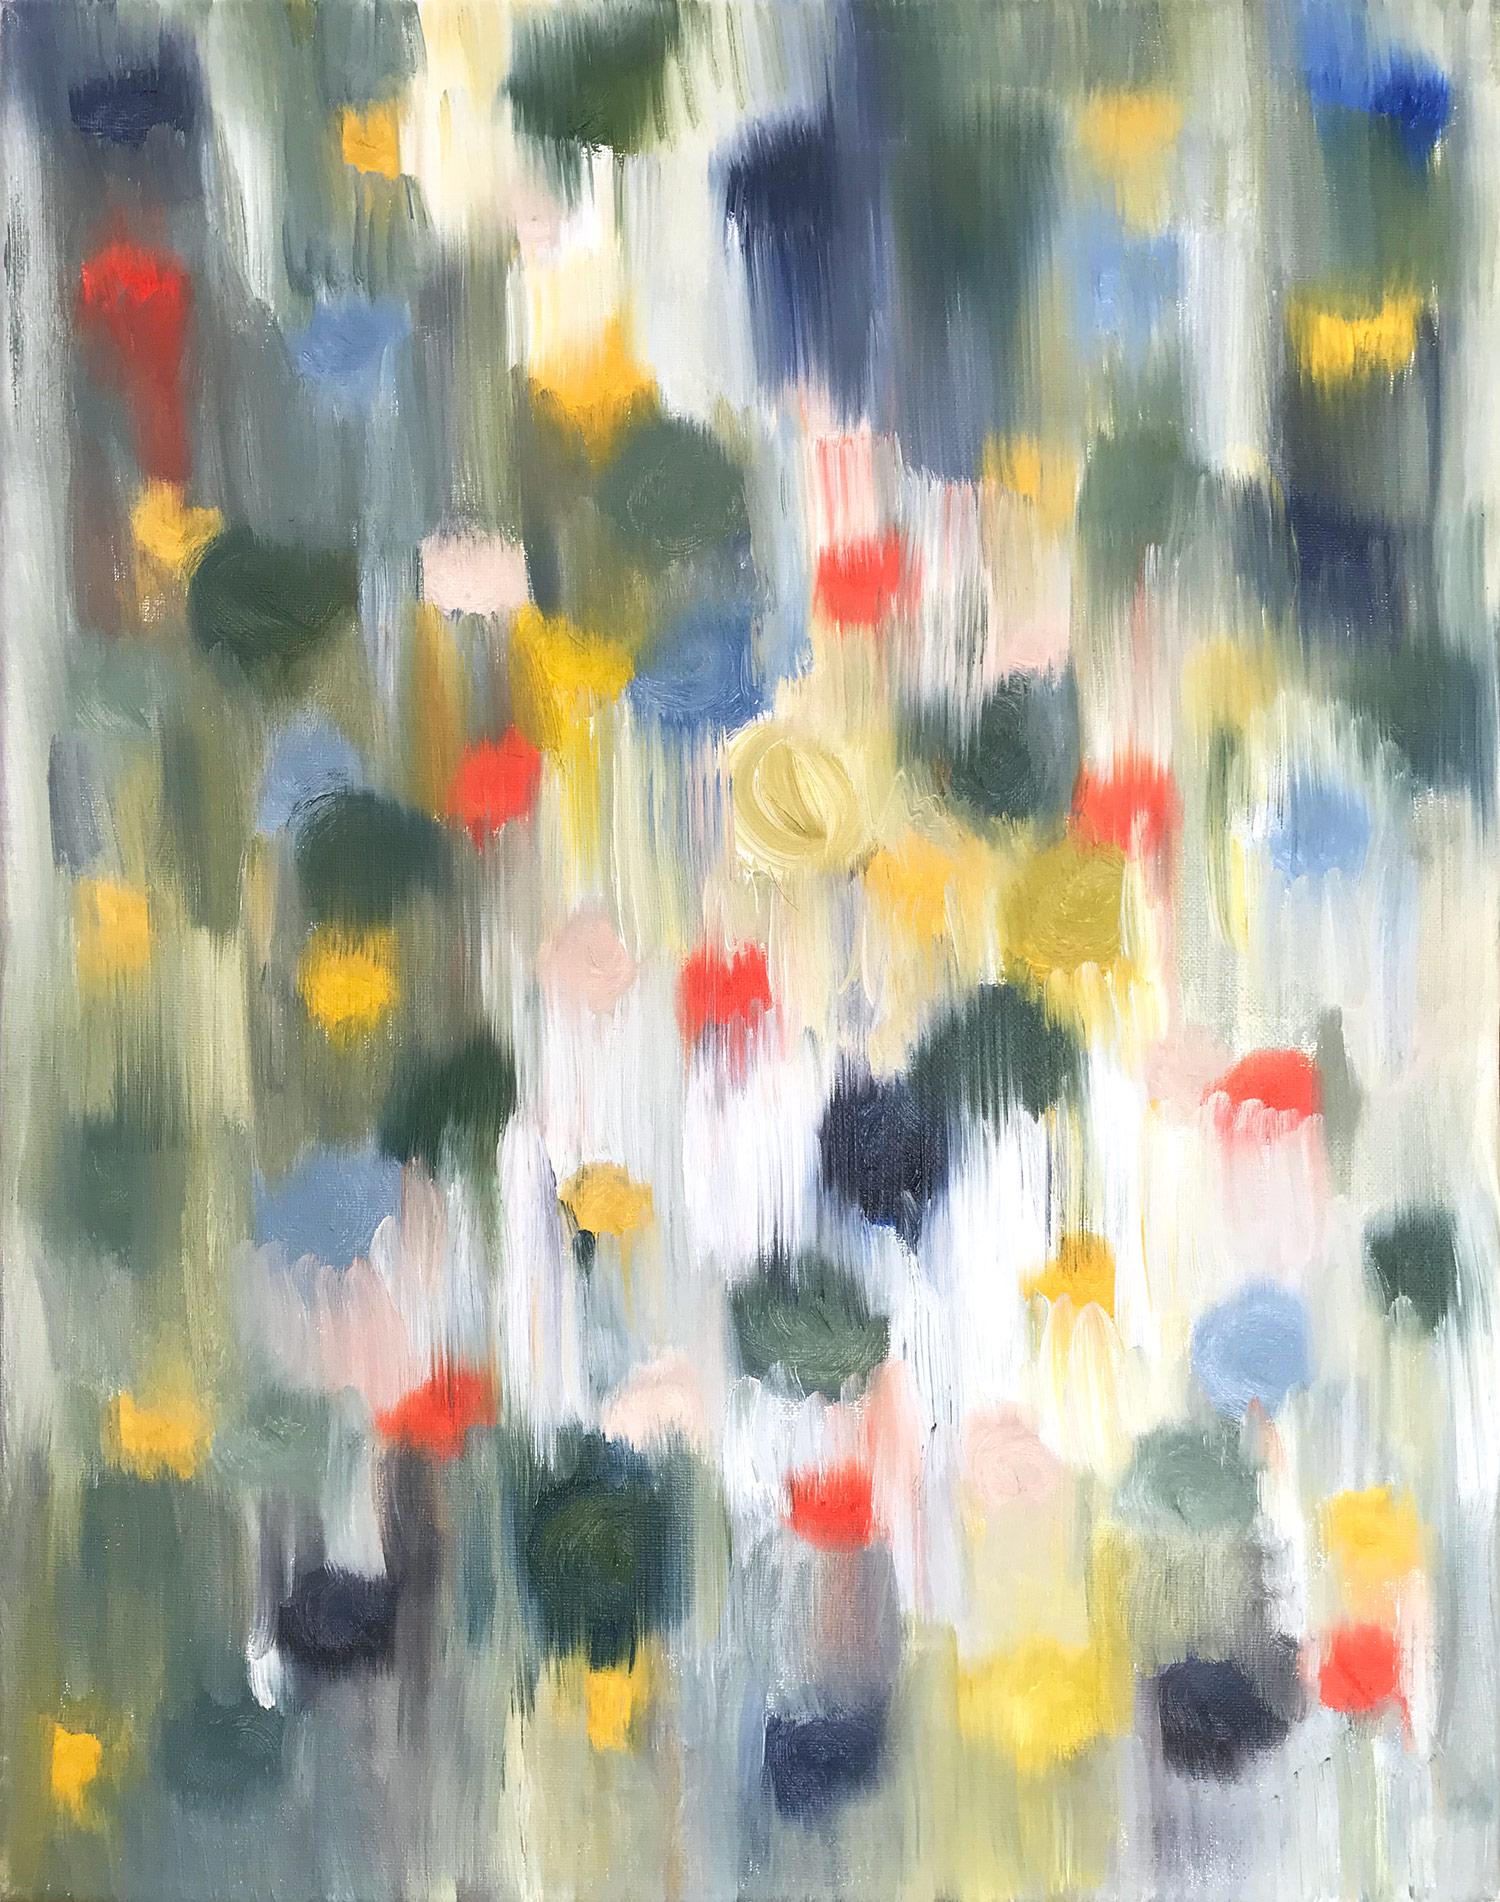 Cindy Shaoul Abstract Painting - “Dripping Dots - Palm Springs” Colorful Abstract Oil Painting on Canvas